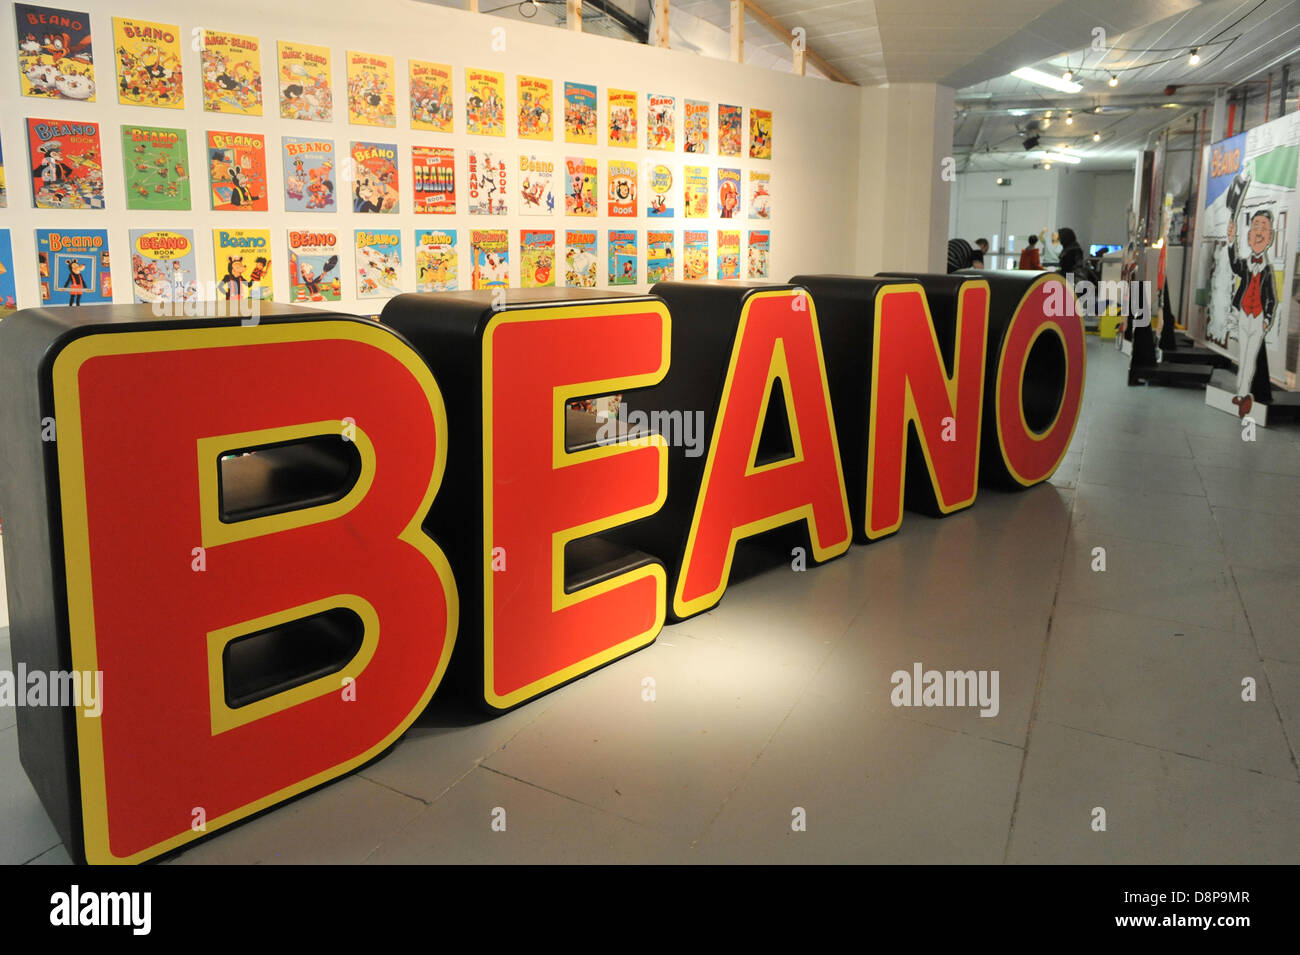 Southbank Centre, London, UK. 2nd June 2013. Inside Beanotown, a celebration of the children's comic. Beanotown in the Southbank Centre in London, 'Beanotown is the home of Dennis the Menace and Gnasher, The Bash Street Kids, Minnie the Minx, Roger the Dodger, plus all the other comic strip superstars from The Beano'. Beanotown is on from 31st May to 8th September. Credit:  Matthew Chattle/Alamy Live News Stock Photo